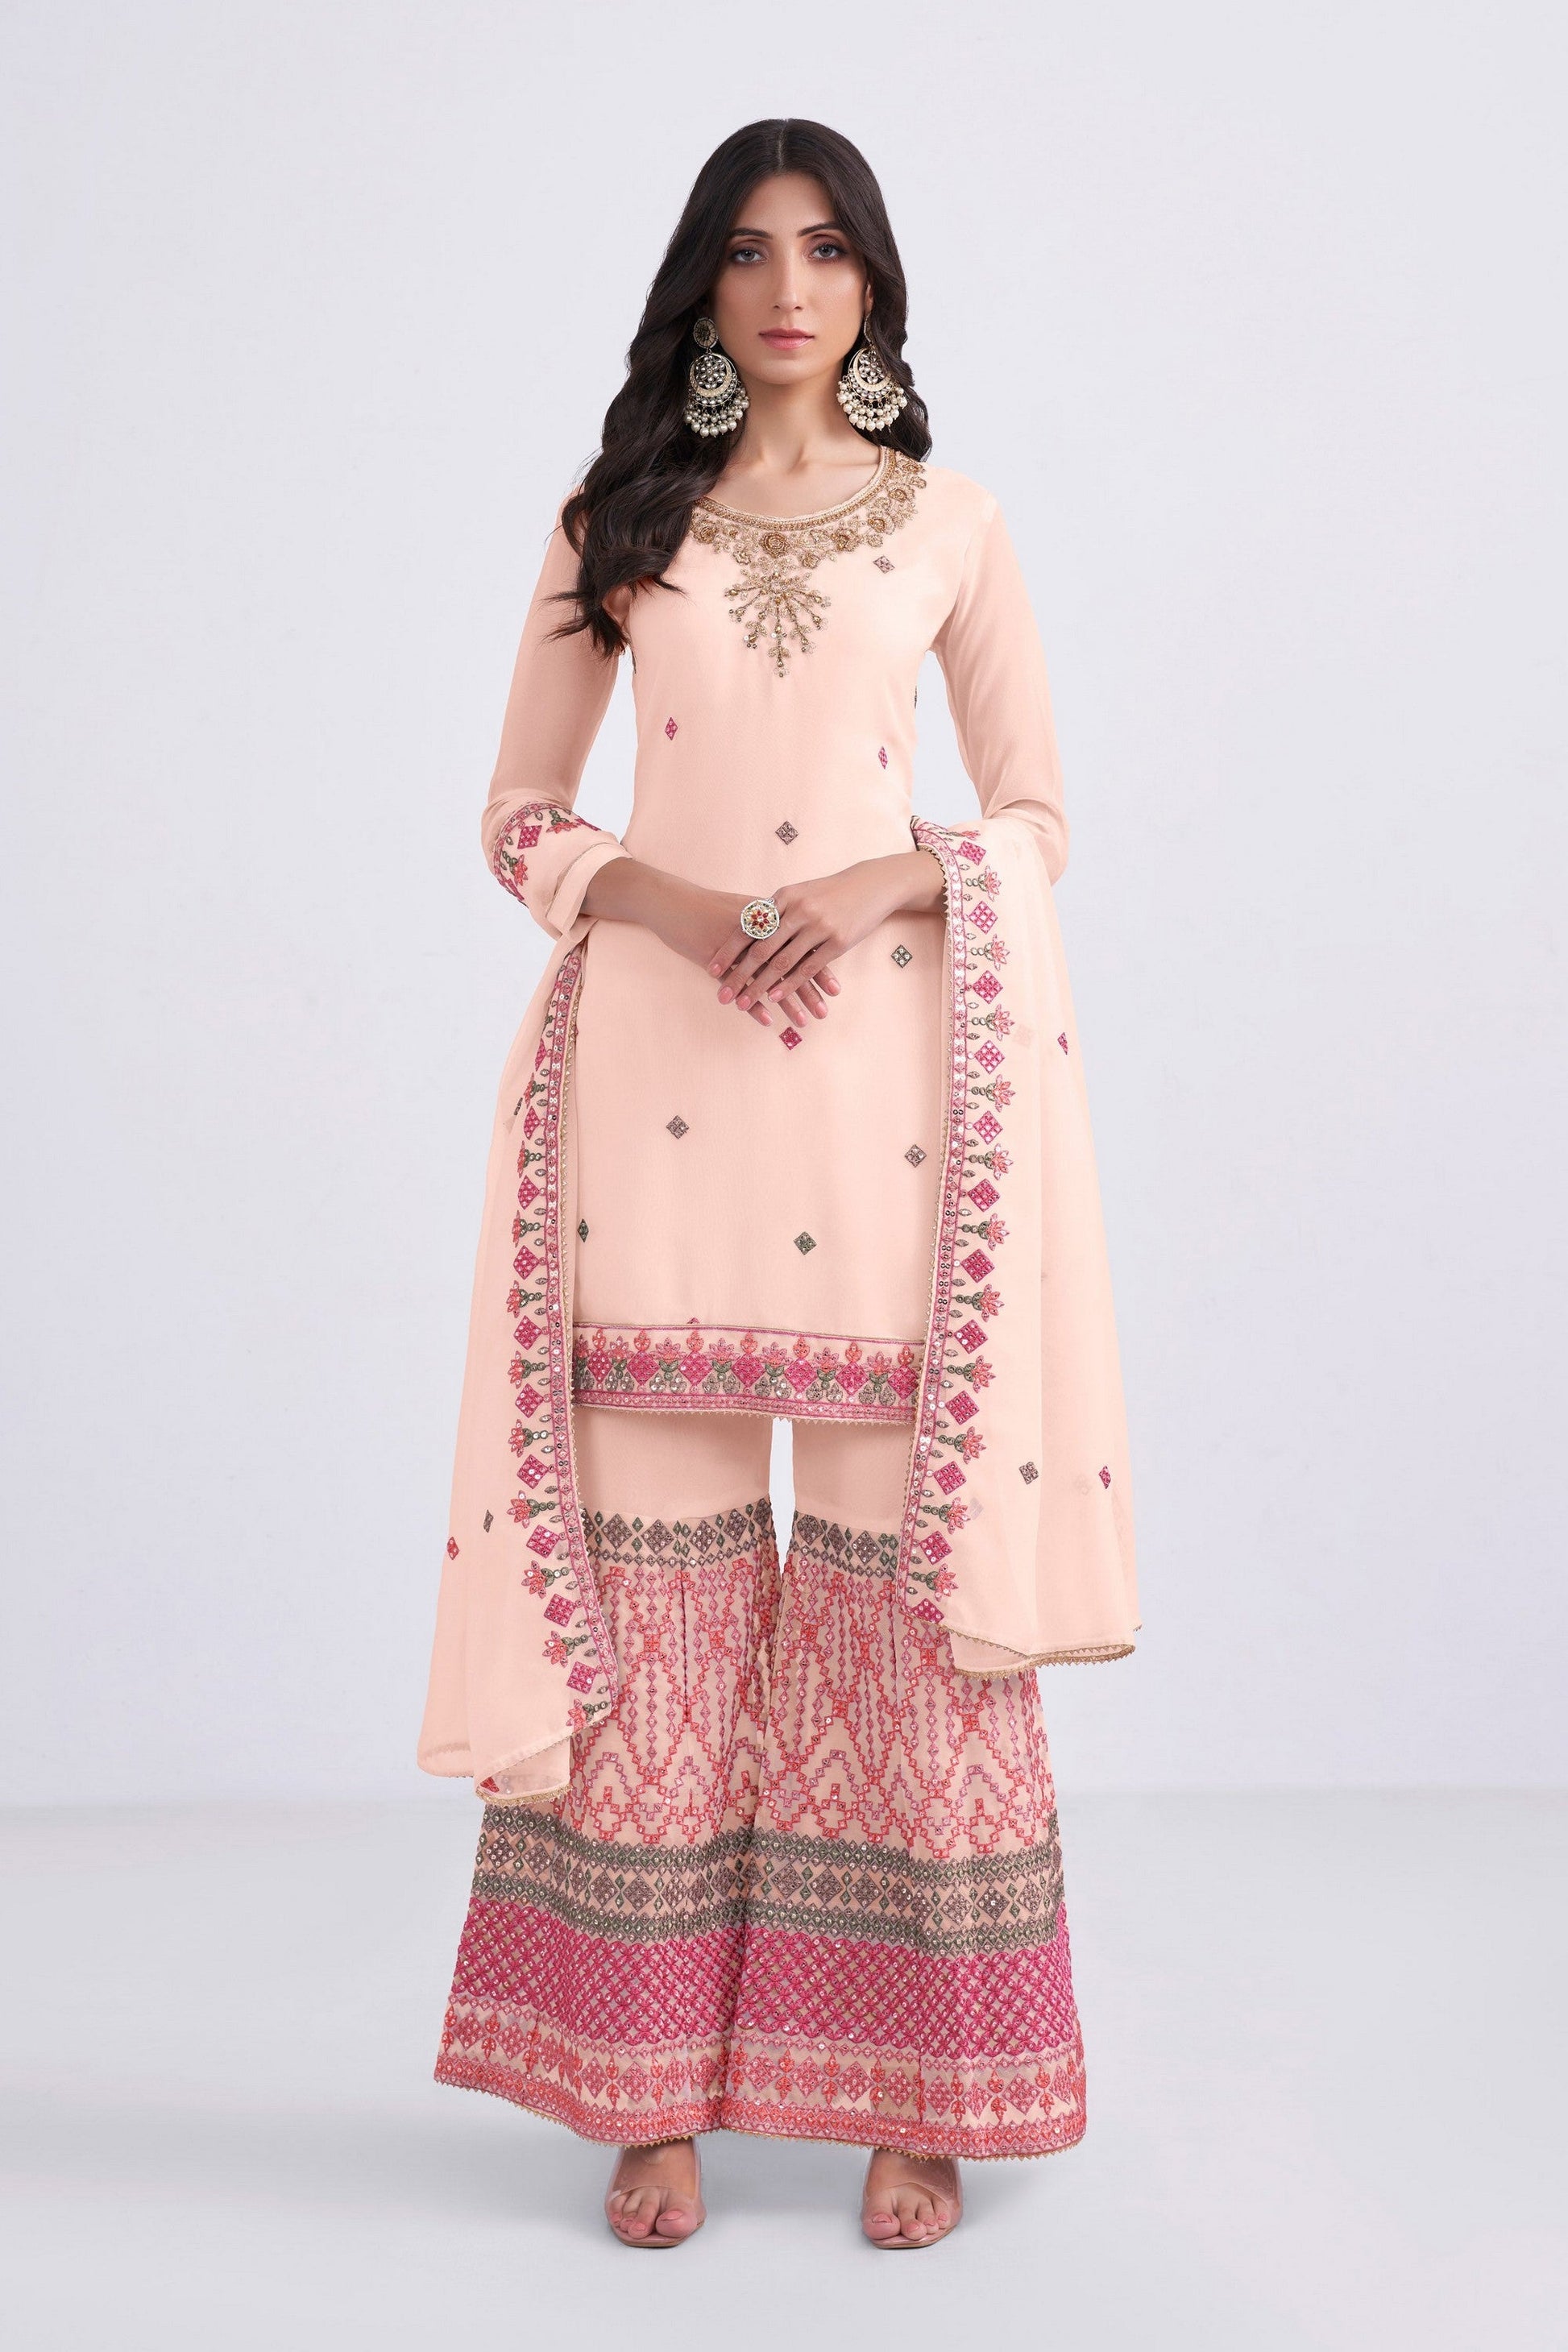 Peach Pakistani Georgette Sharara For Indian Festivals & Weddings - Sequence Embroidery Work, Thread Embroidery Work, Khatli Work, Zari Work